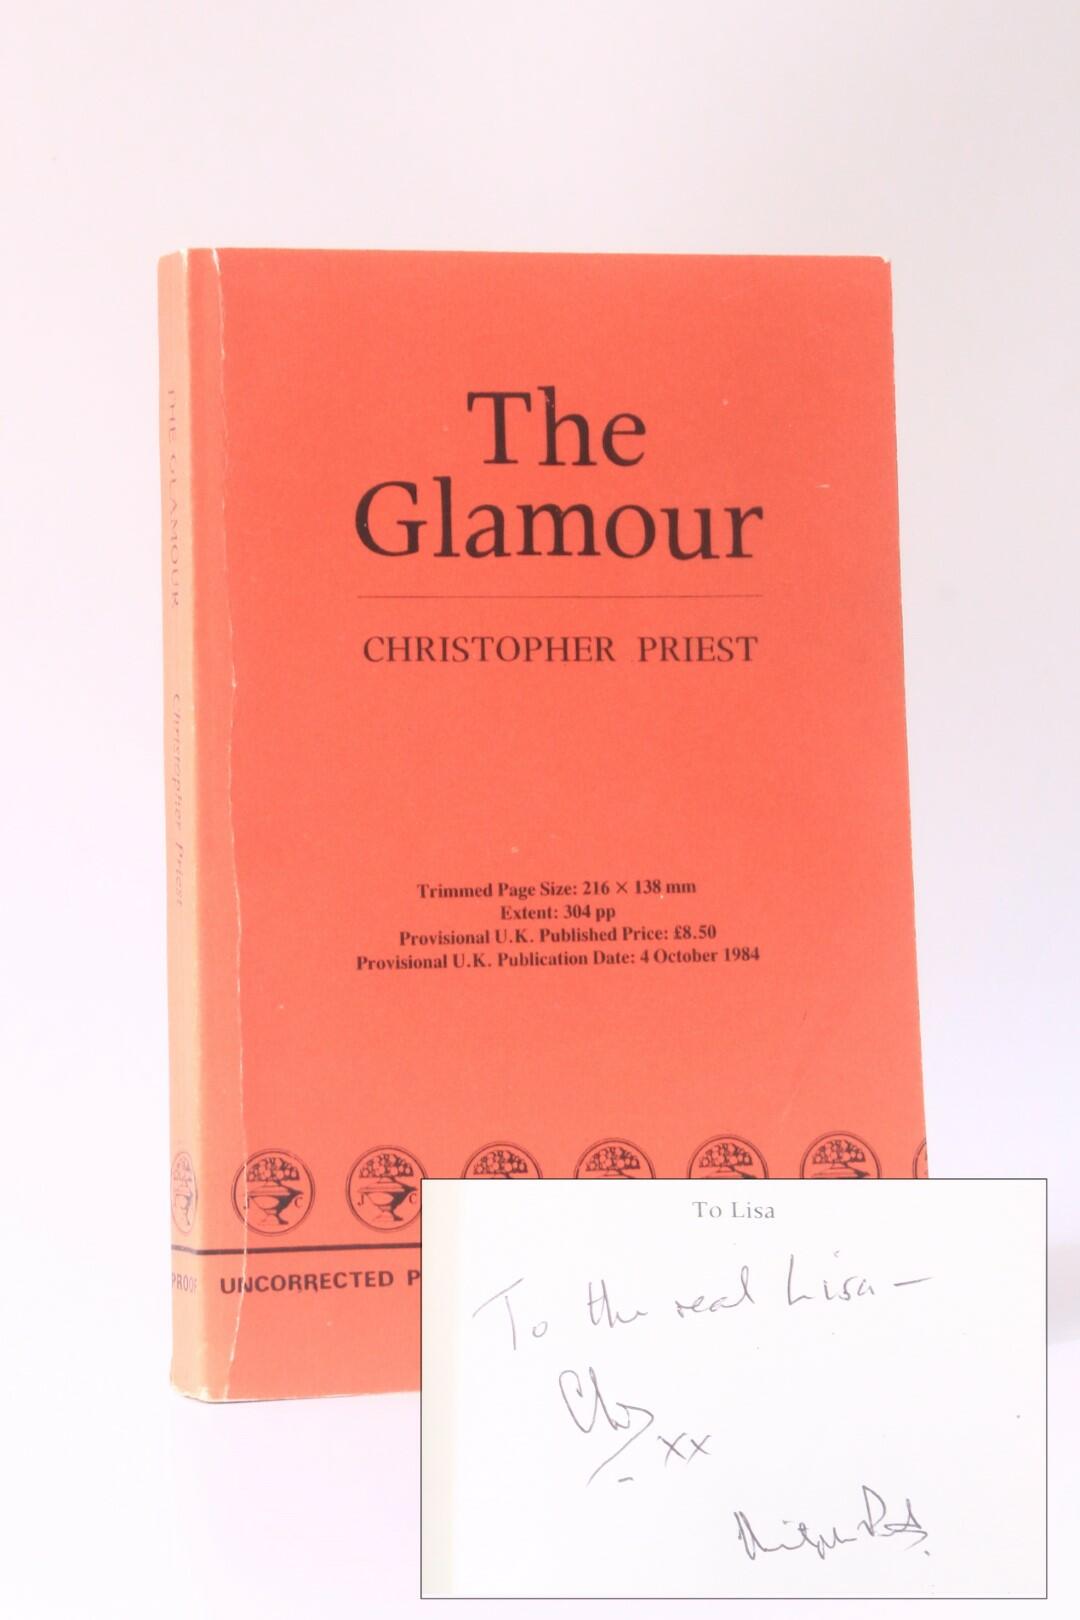 Christopher Priest - The Glamour - Jonathan Cape, 1984, Proof. Signed